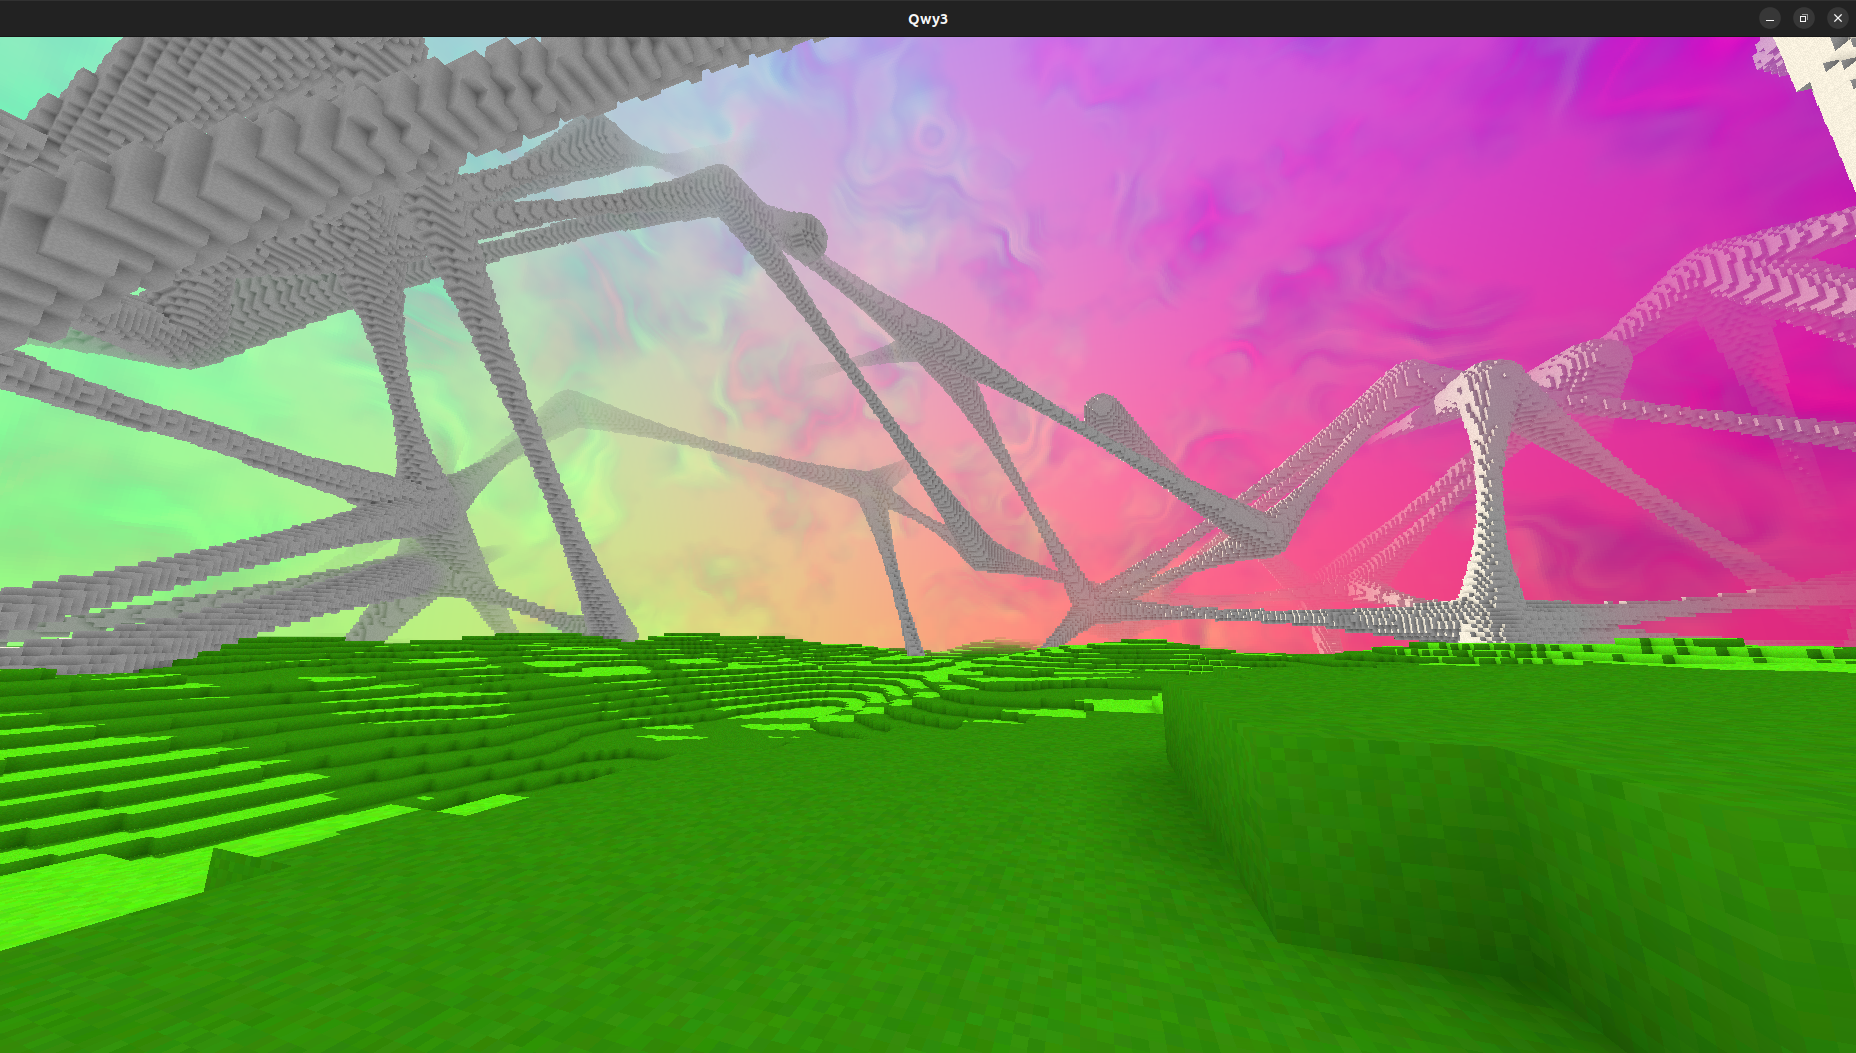 Image of some terrain generation using the structure engine with multiple structure types.